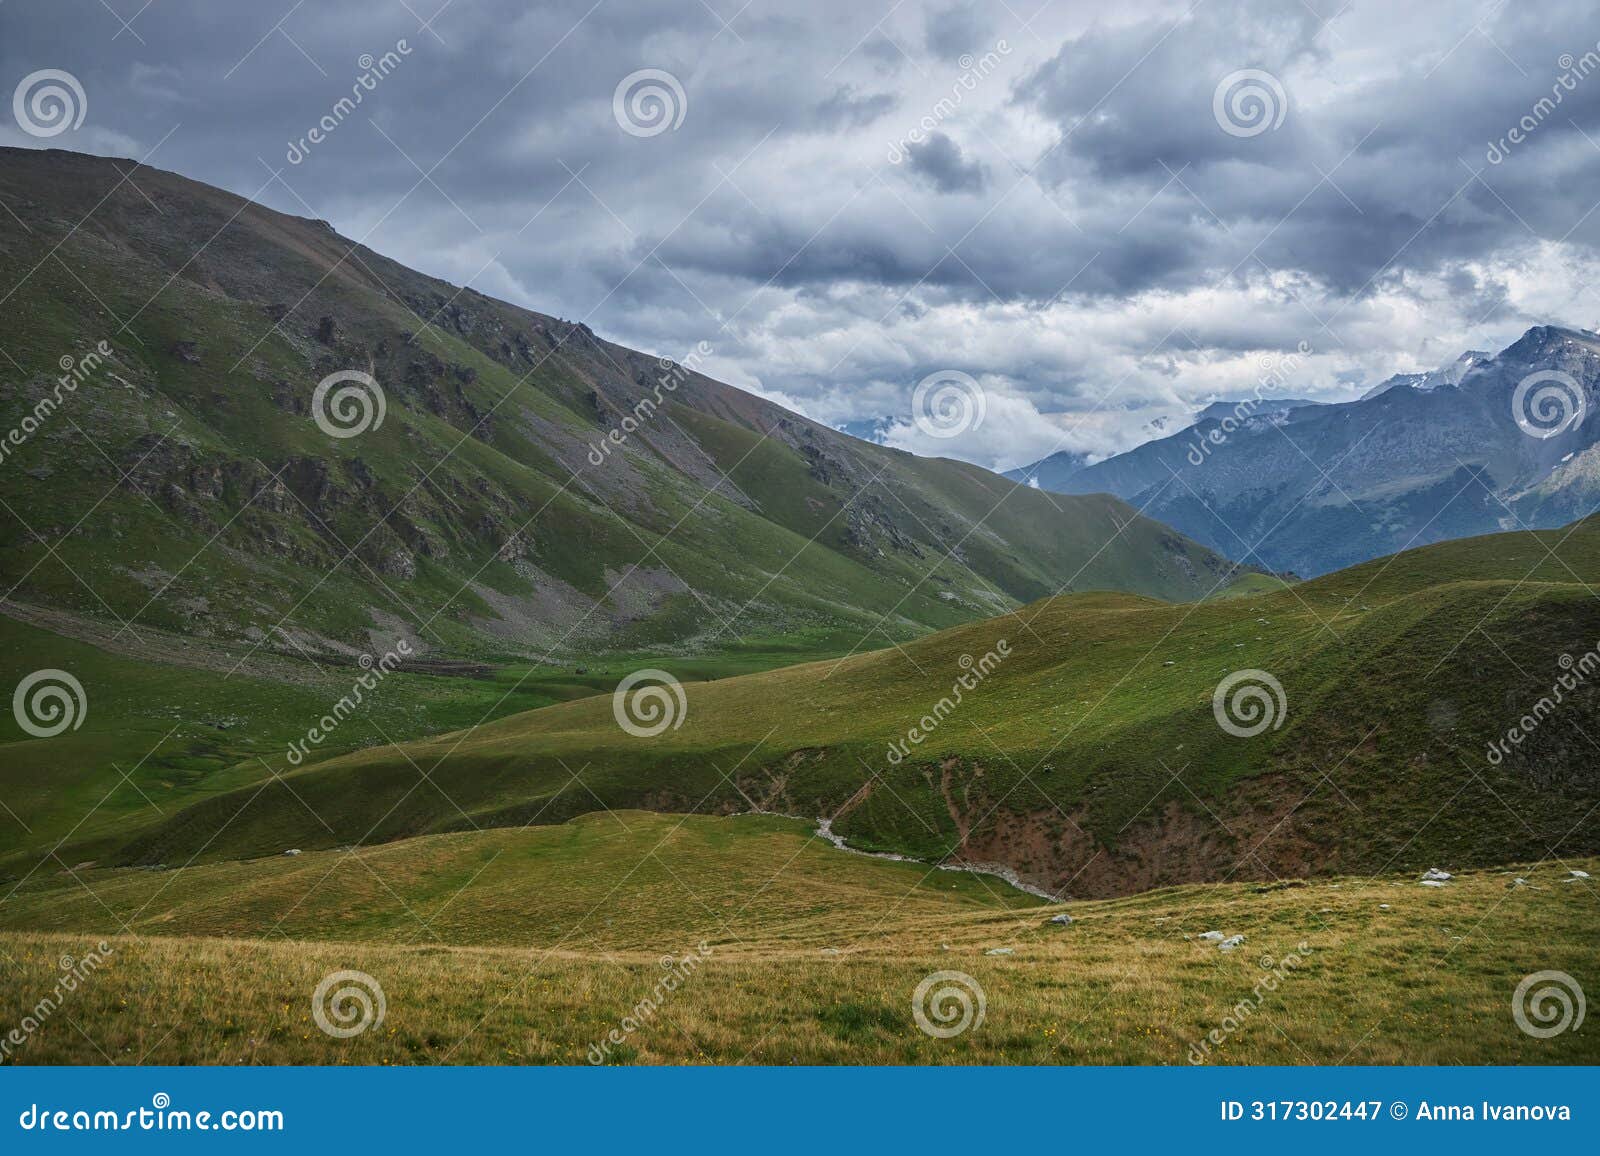 overcast skies loom above verdant mountain slopes with a winding path visible in the valley